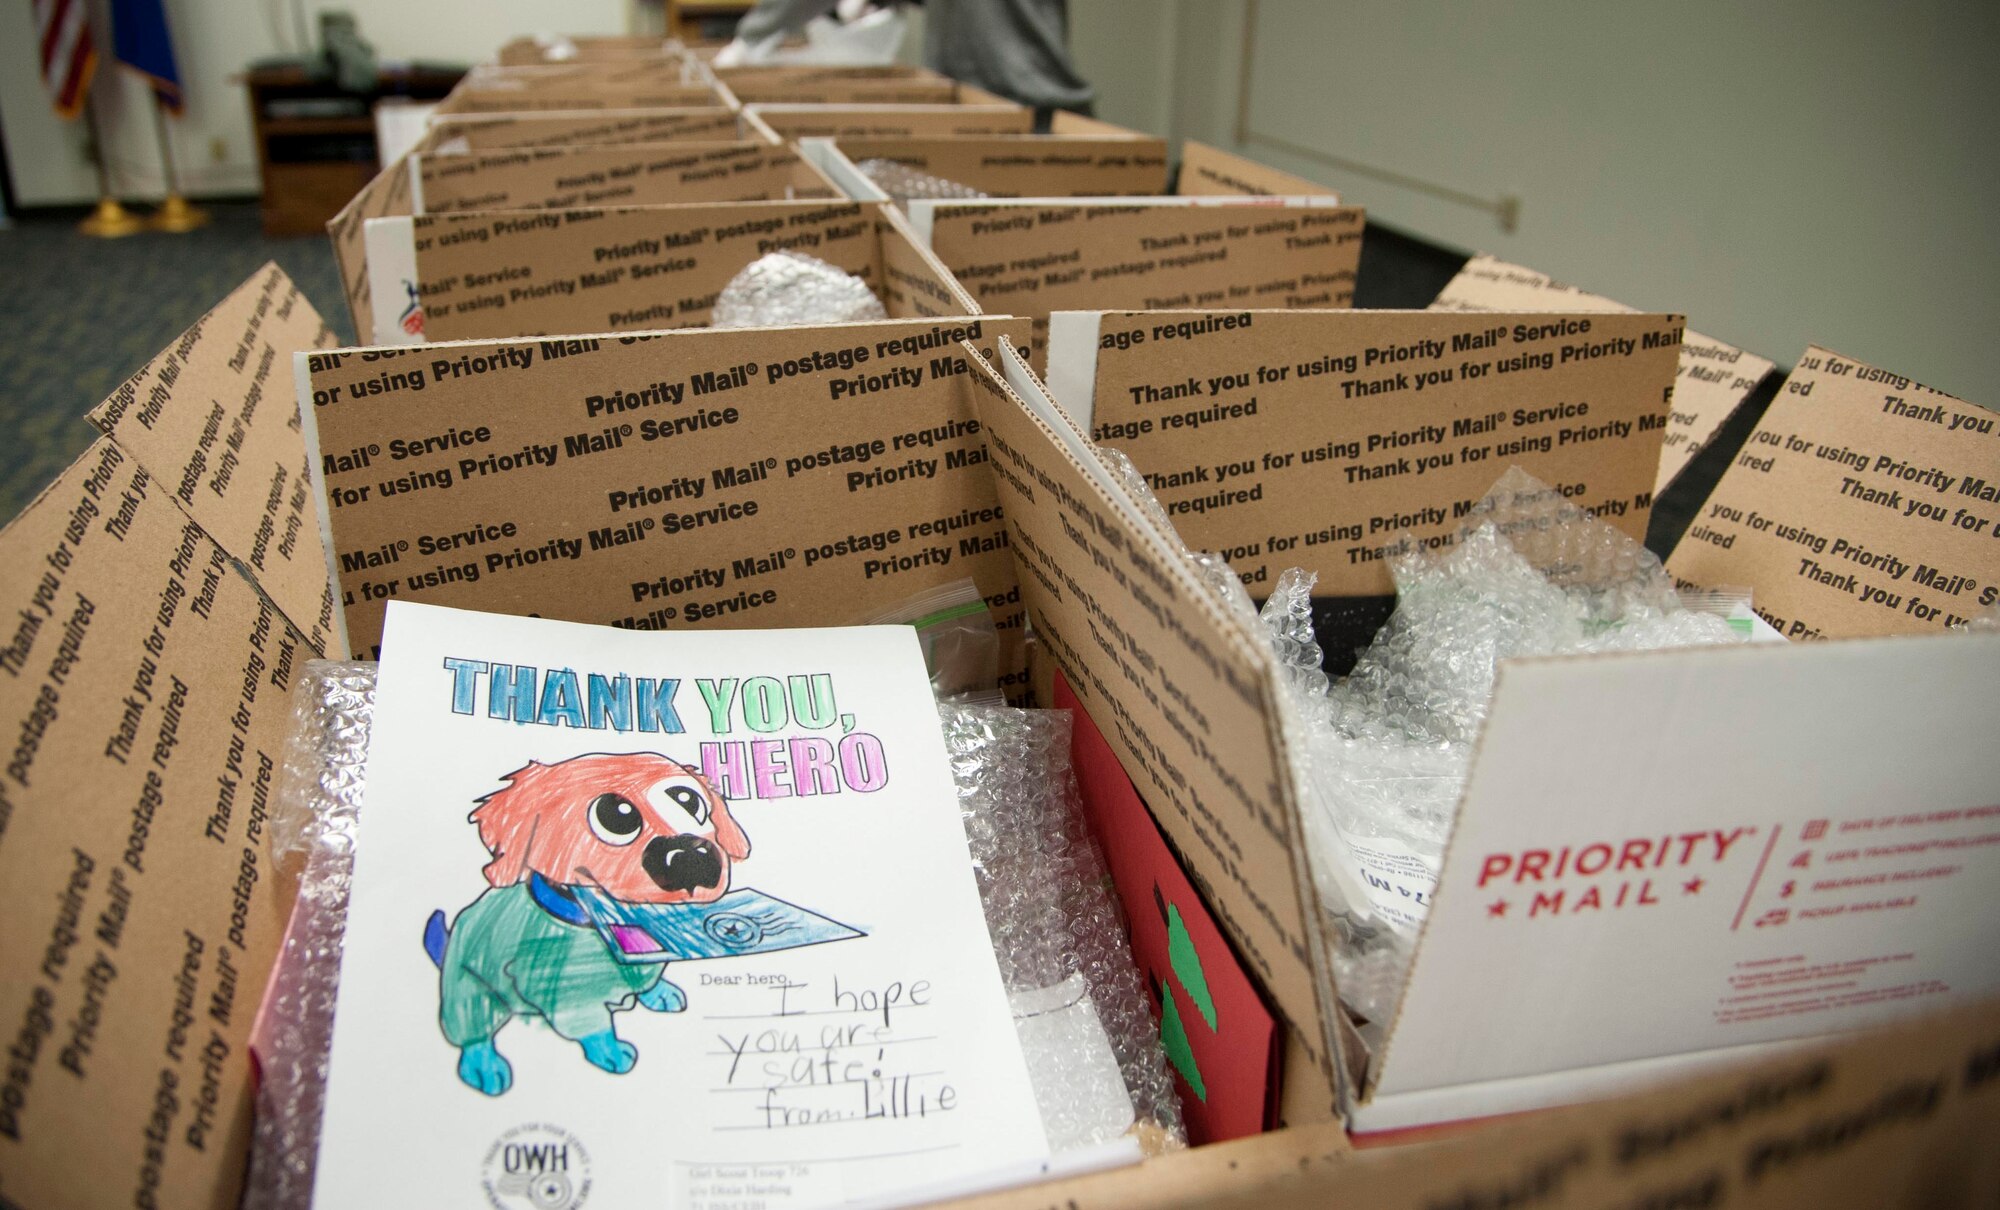 More than 1,600 holiday cookies, candy and greetings from local elementary school students were packed up and mailed to 23 deployed or remotely assigned Airmen Nov. 10 during Operation Cookie Cutter at Vance Air Force Base, Oklahoma. (U.S. Air Force photo/ Tech. Sgt. Nancy Falcon)